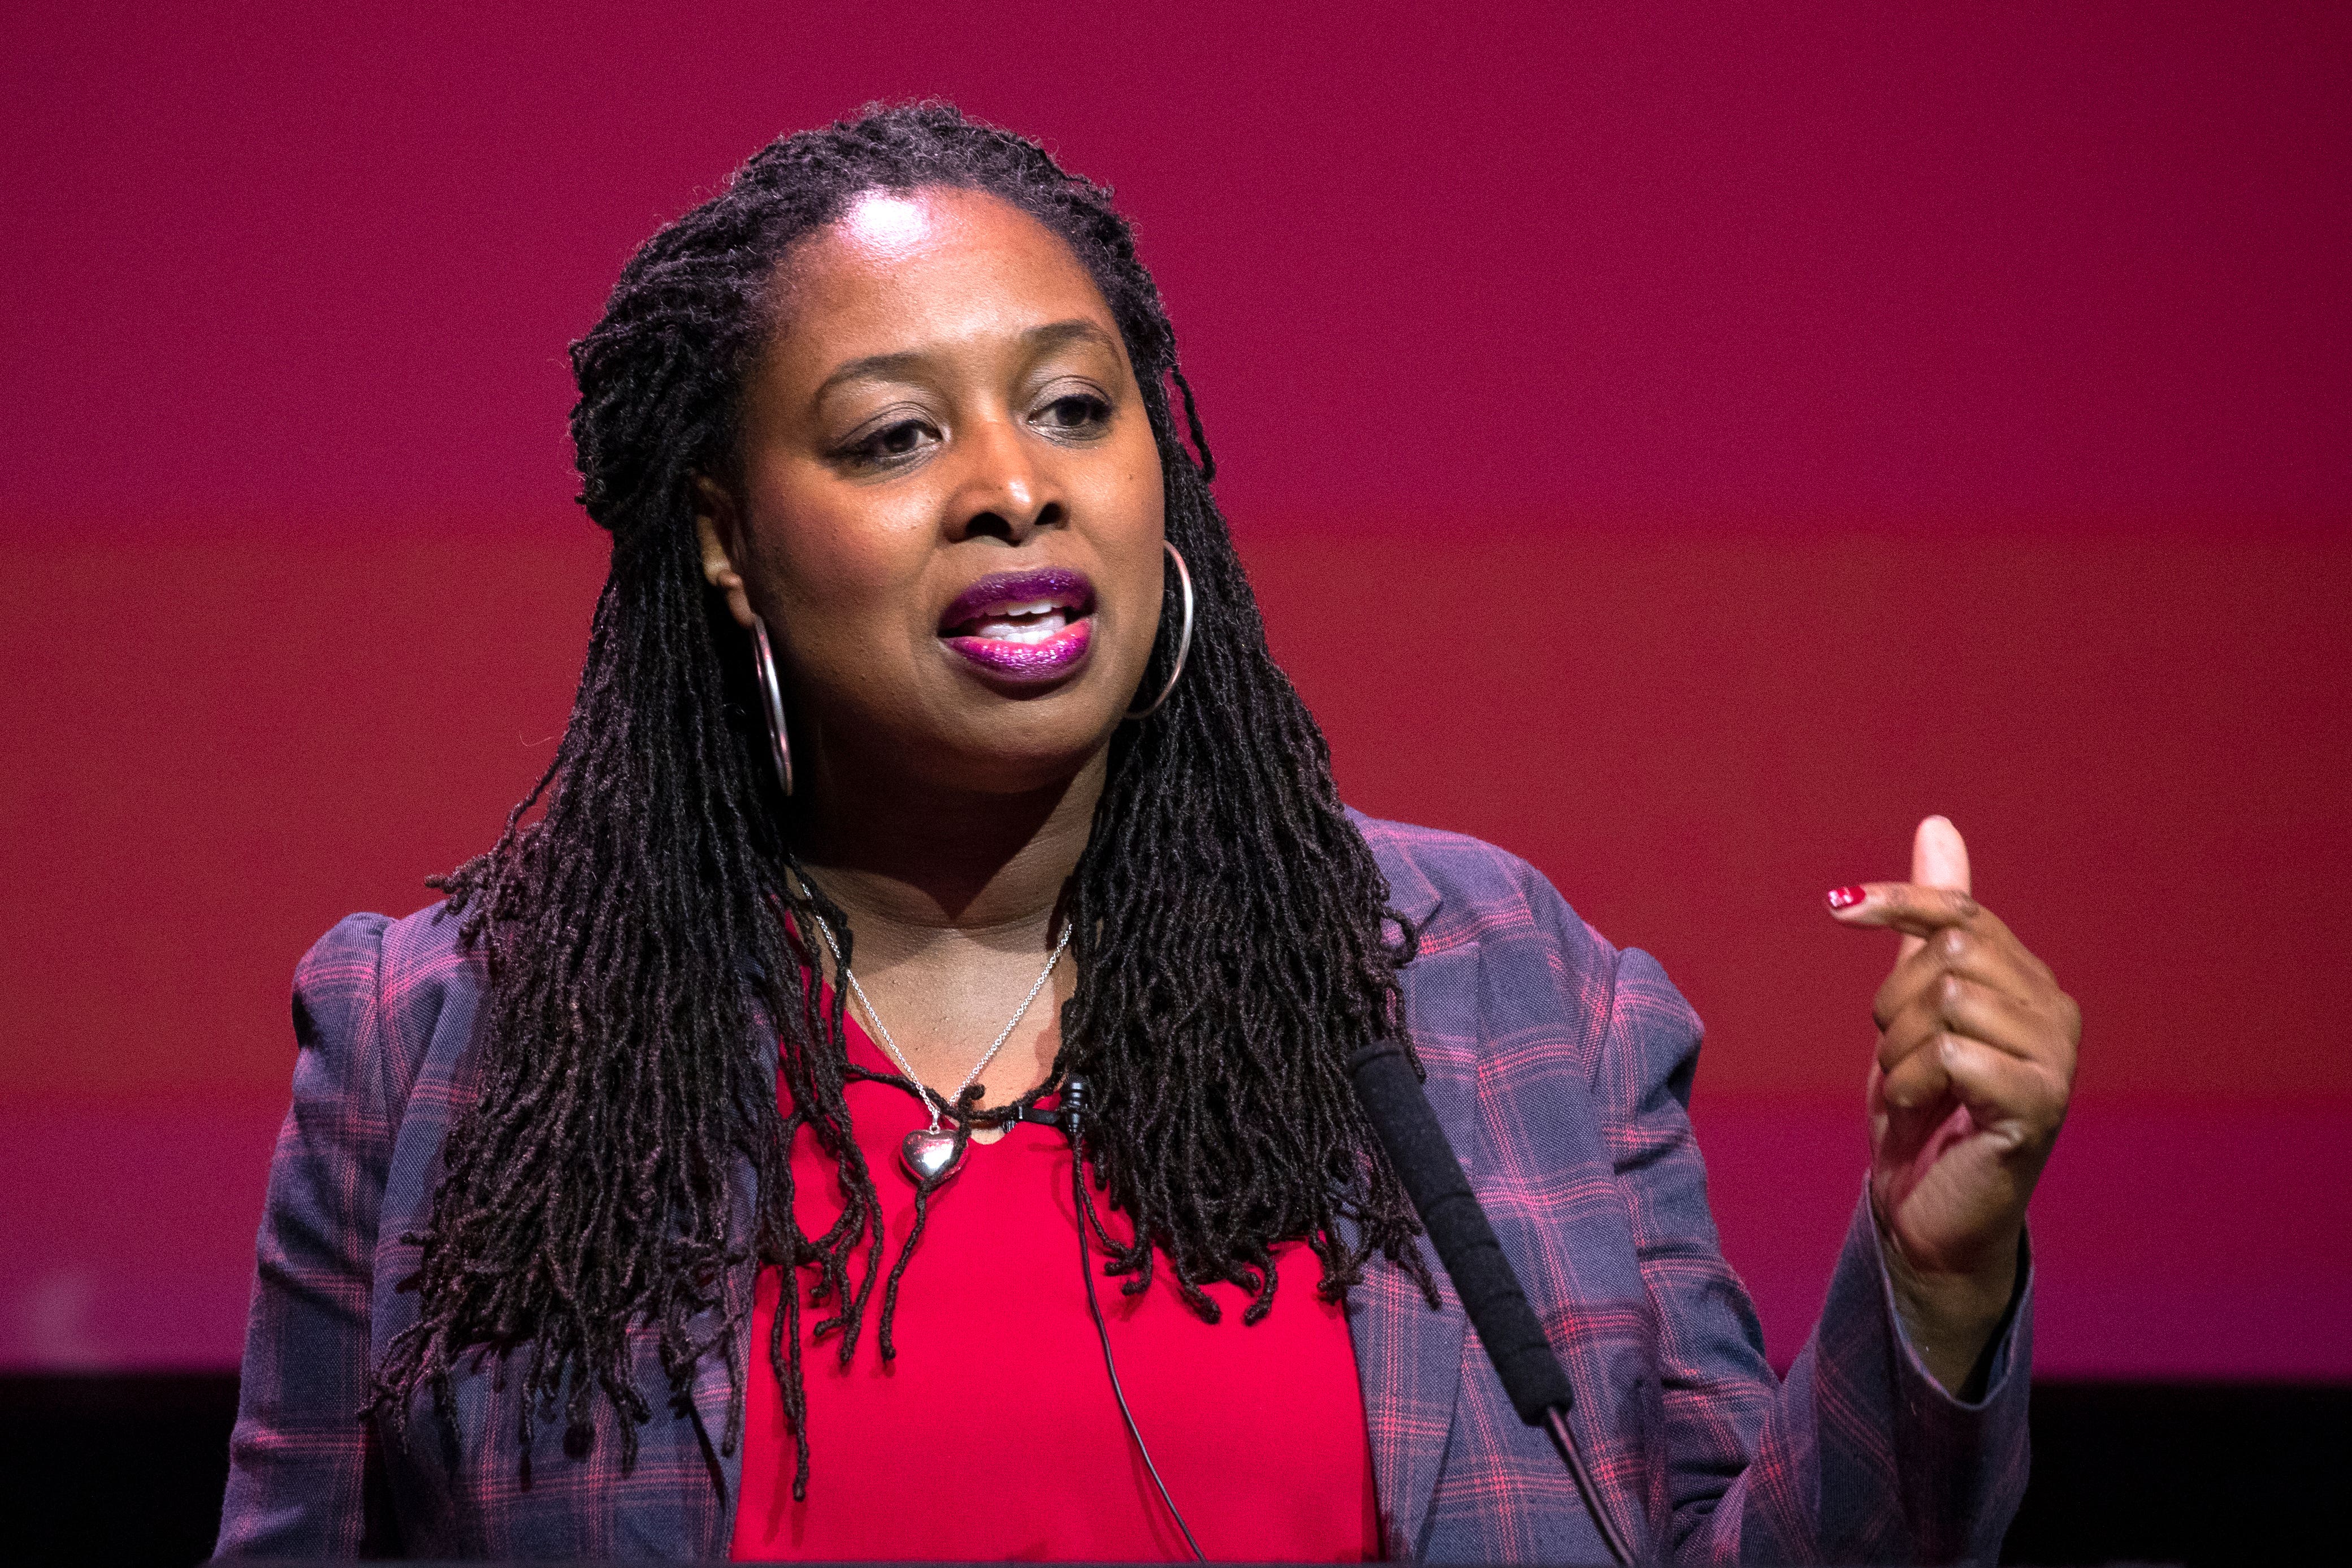 Dawn Butler is a Labour candidate for Brent East